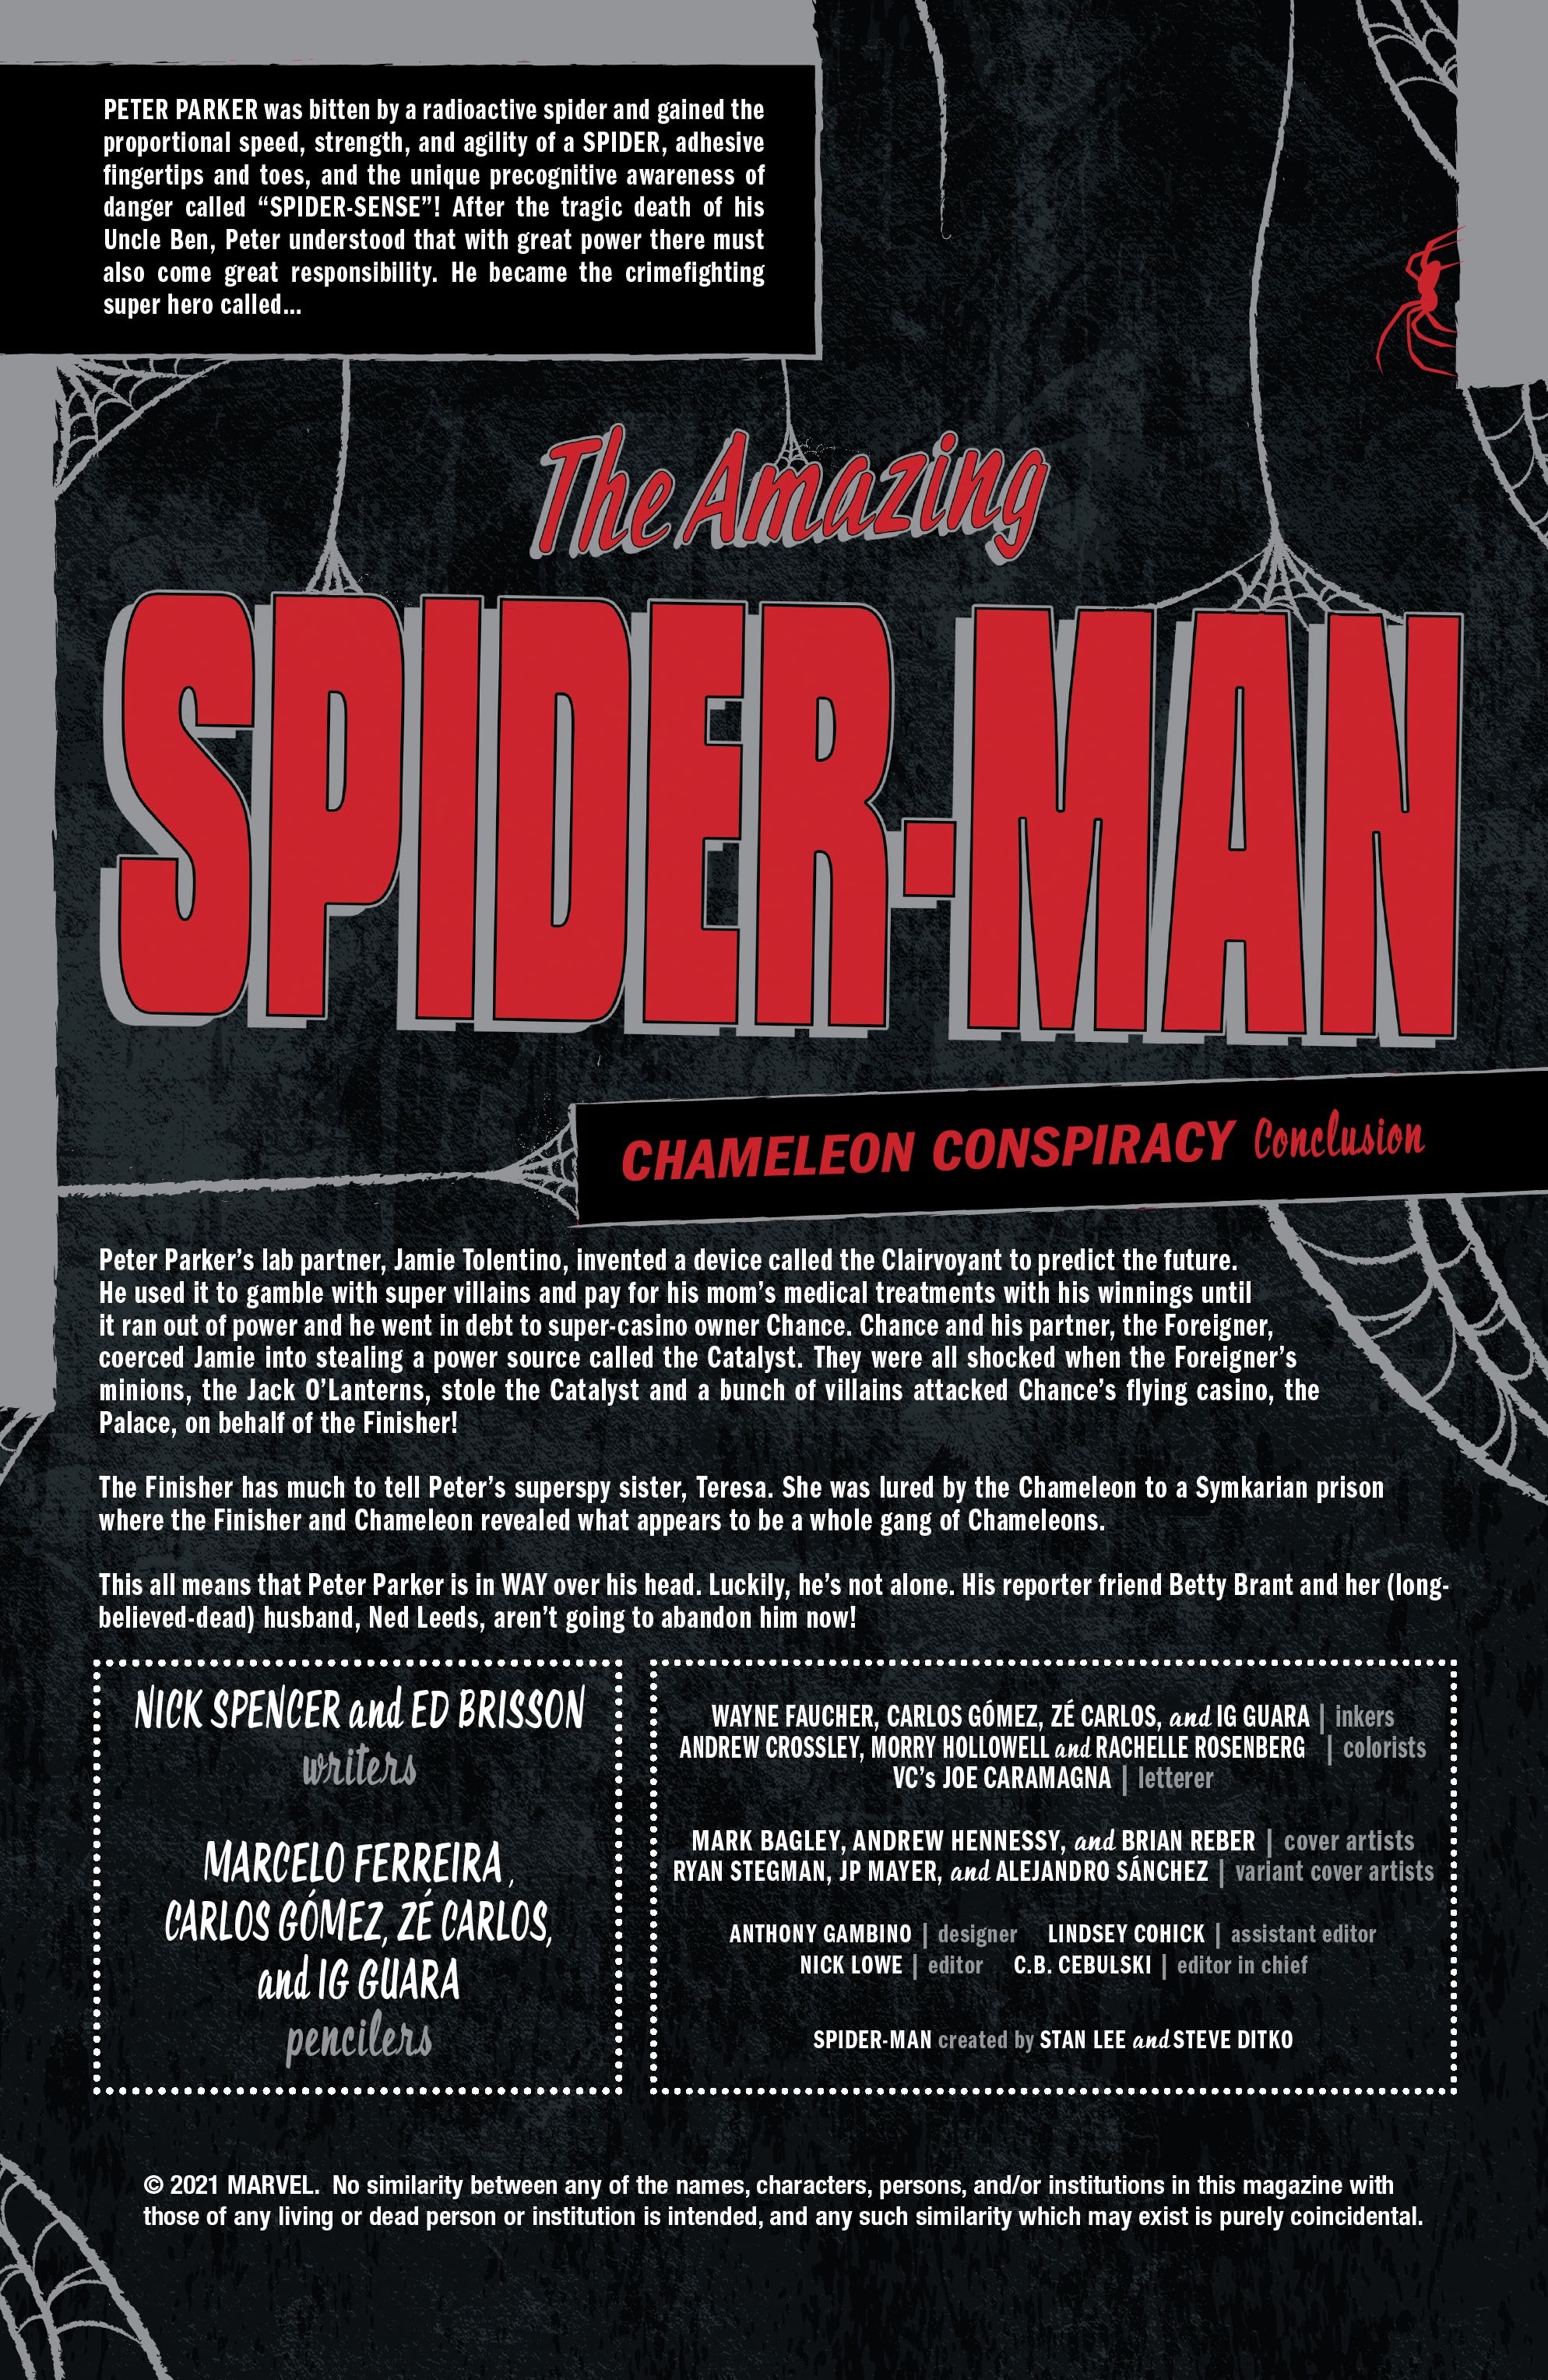 Read online Giant-Size Amazing Spider-Man comic -  Issue # Chameleon Conspiracy - 2